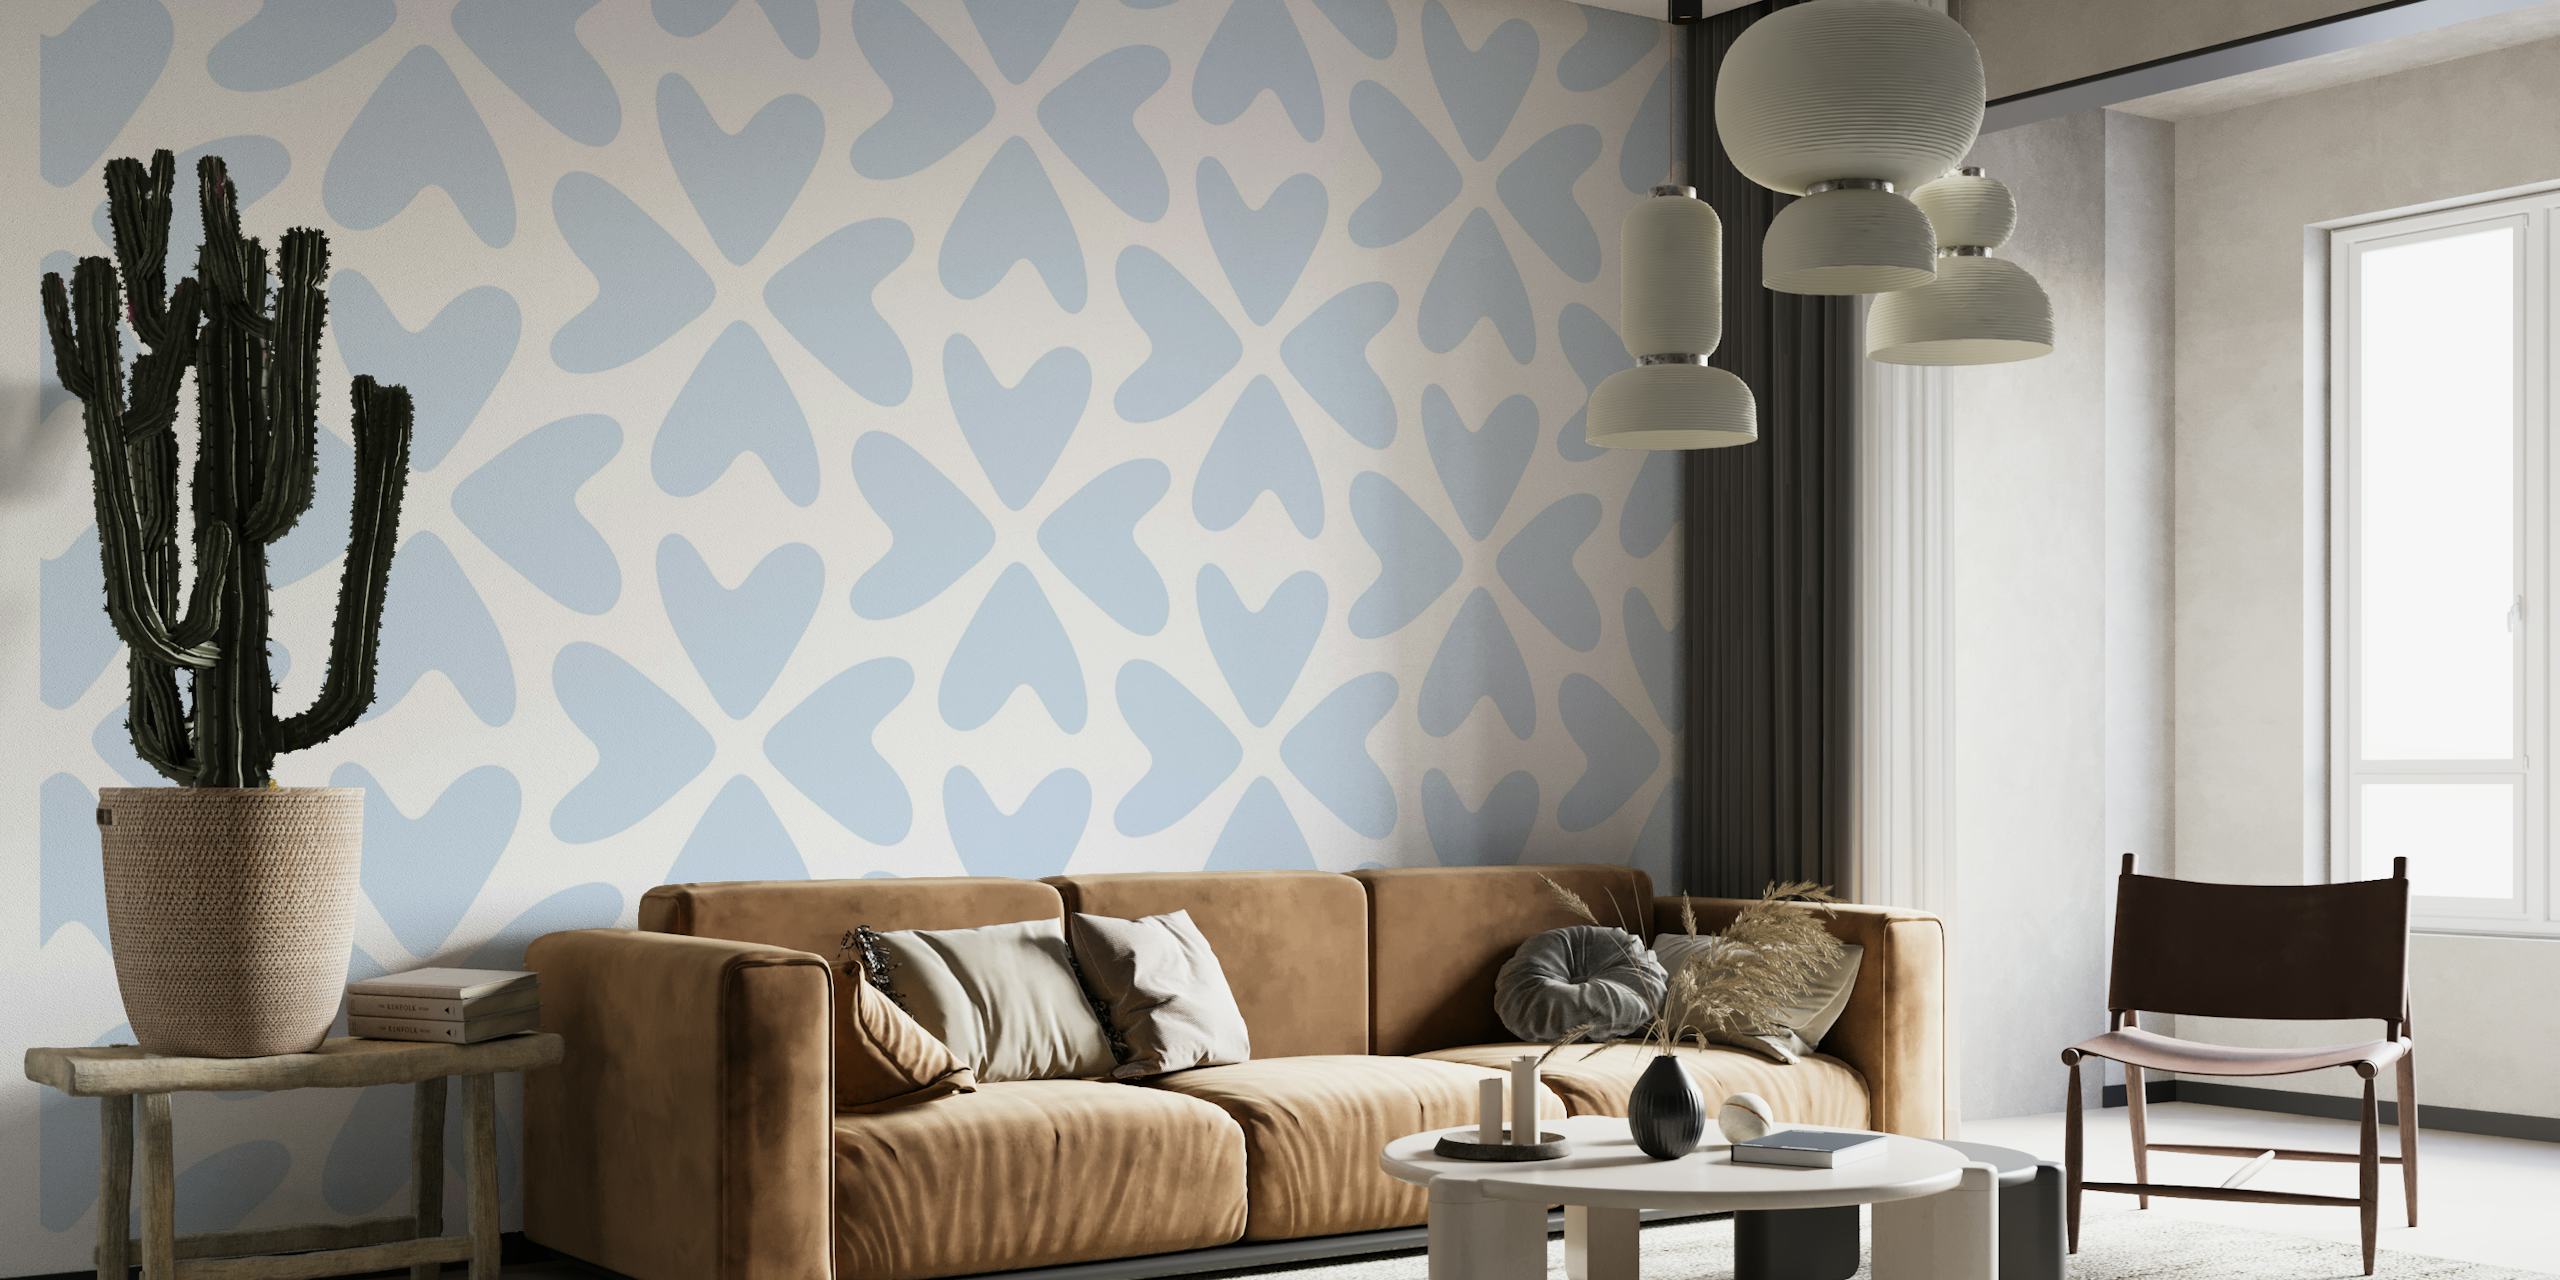 Light blue wall mural with stylized heart patterns promoting a serene and affectionate ambiance